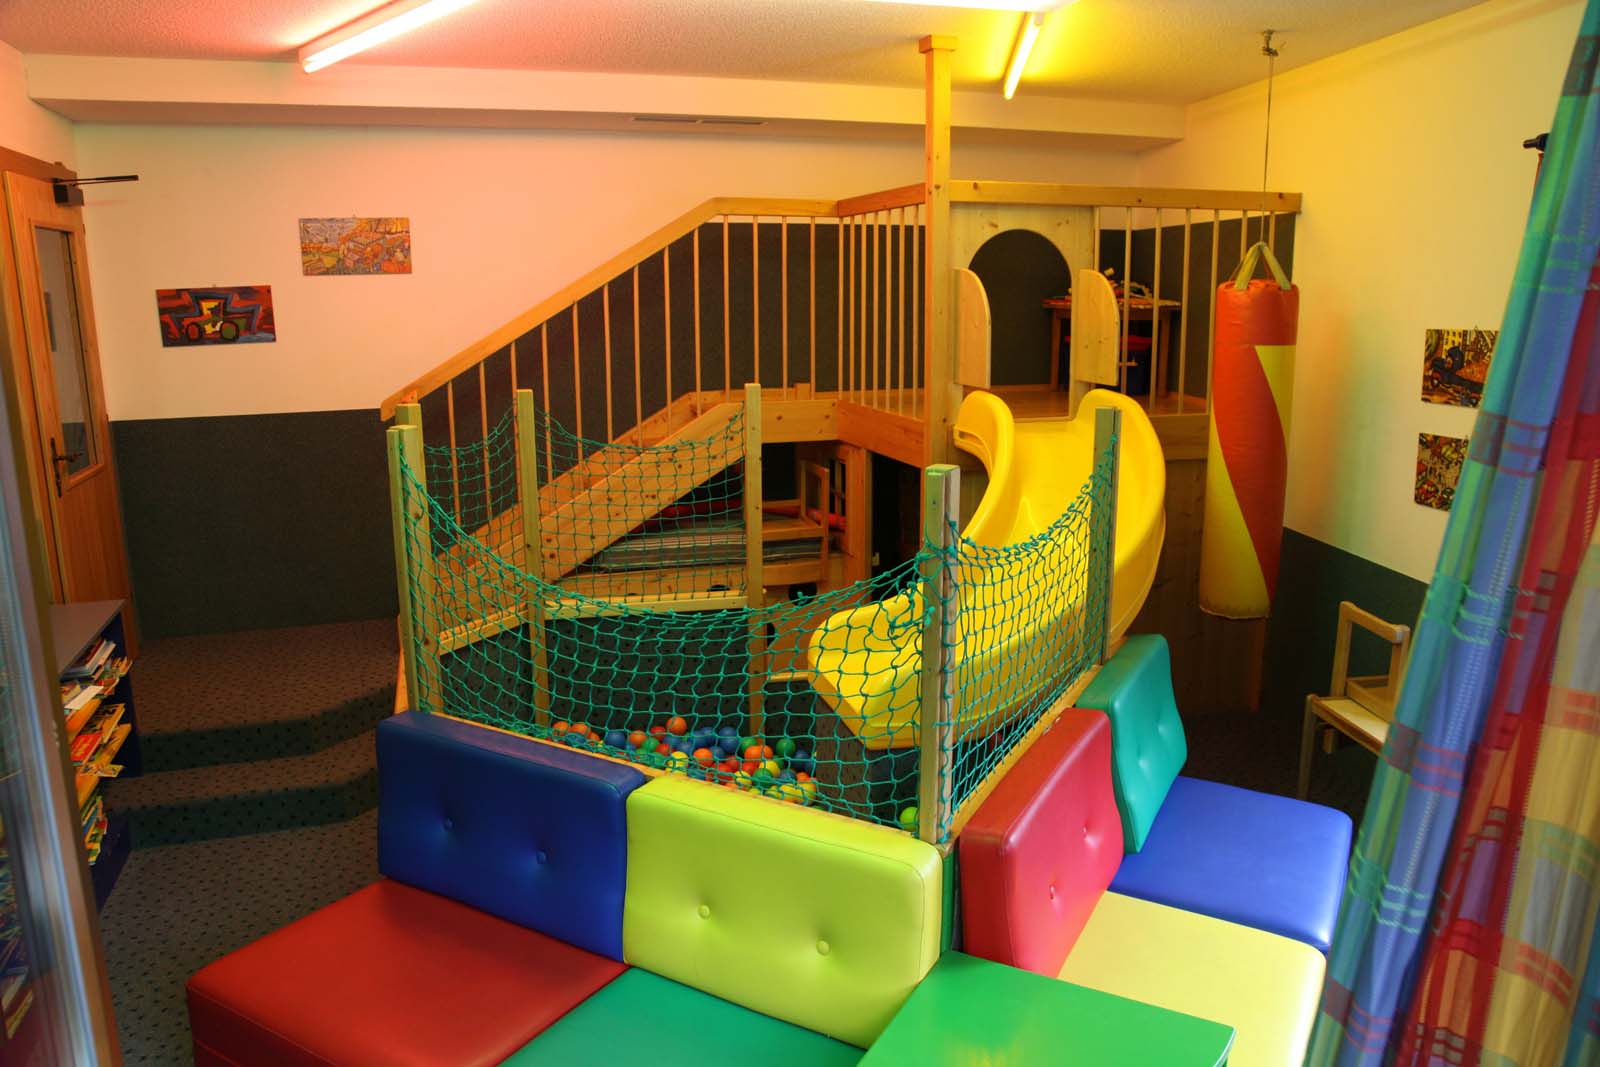 Children's playroom and playground in the garden